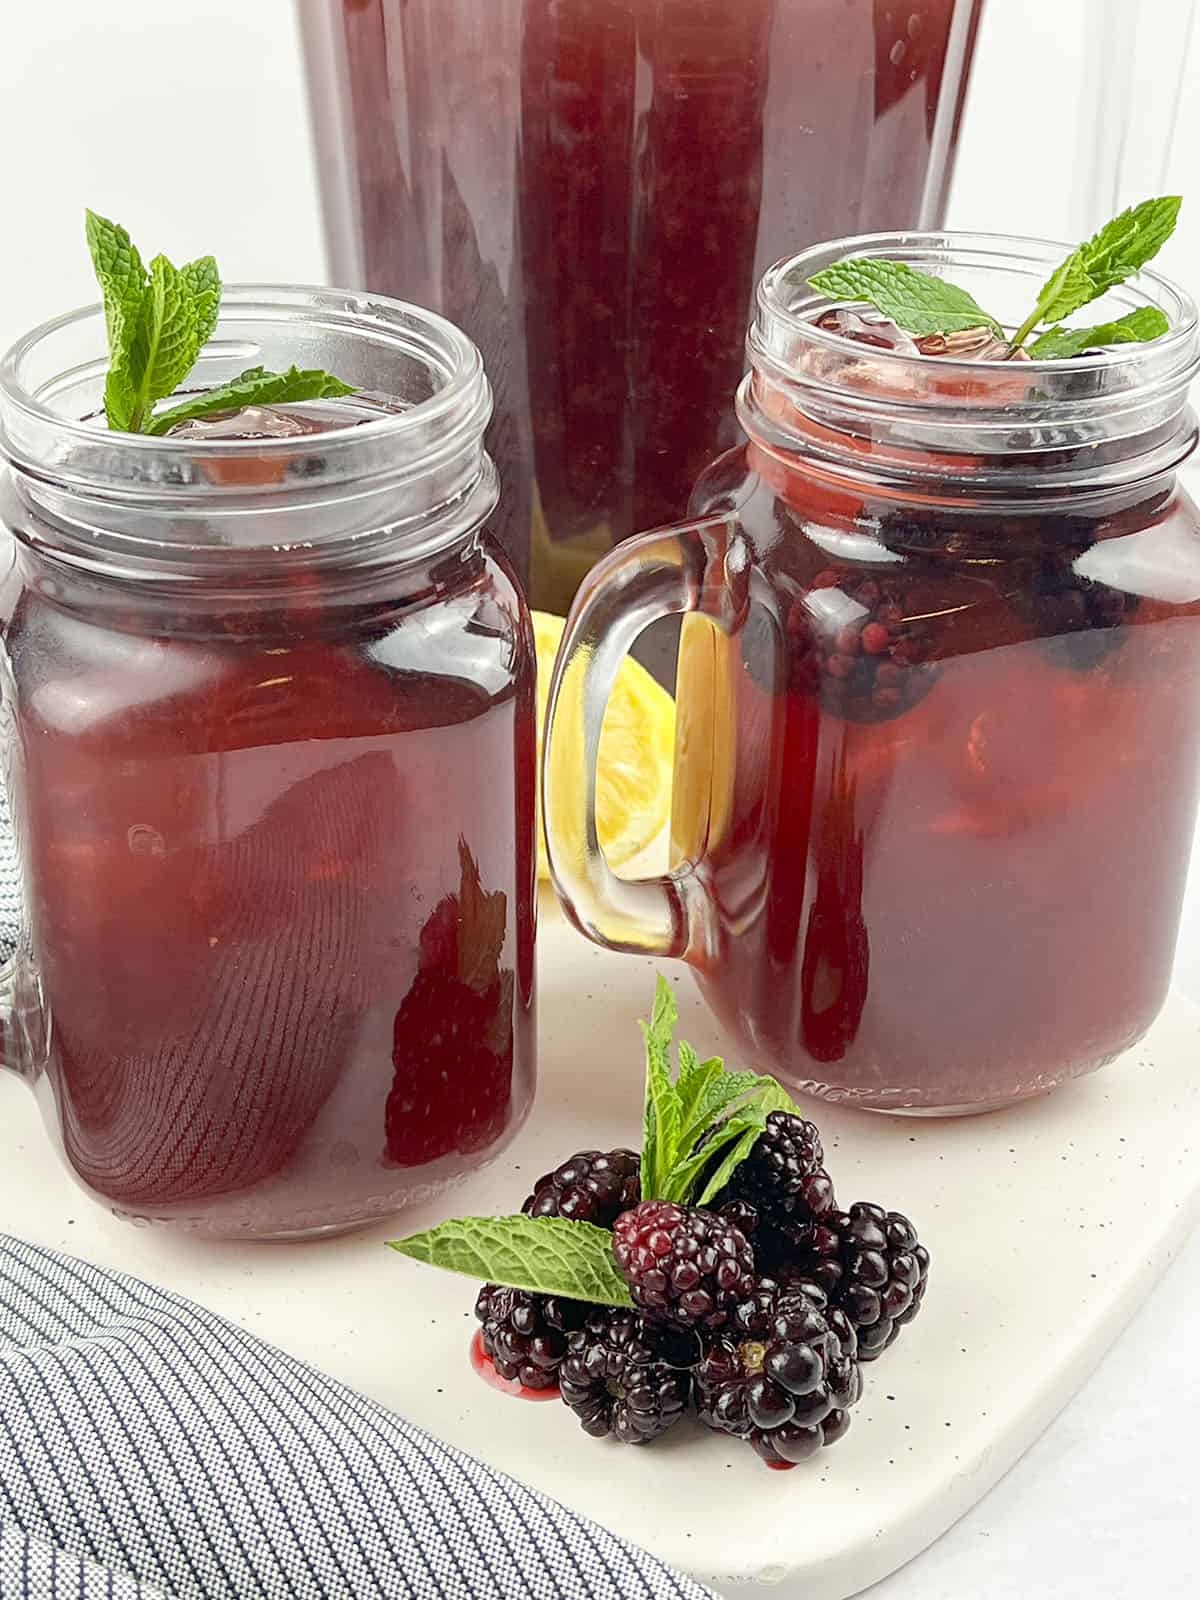 Two glasses of iced tea with a pitcher in behind them. In front there is a small pile of blackberries with mint.